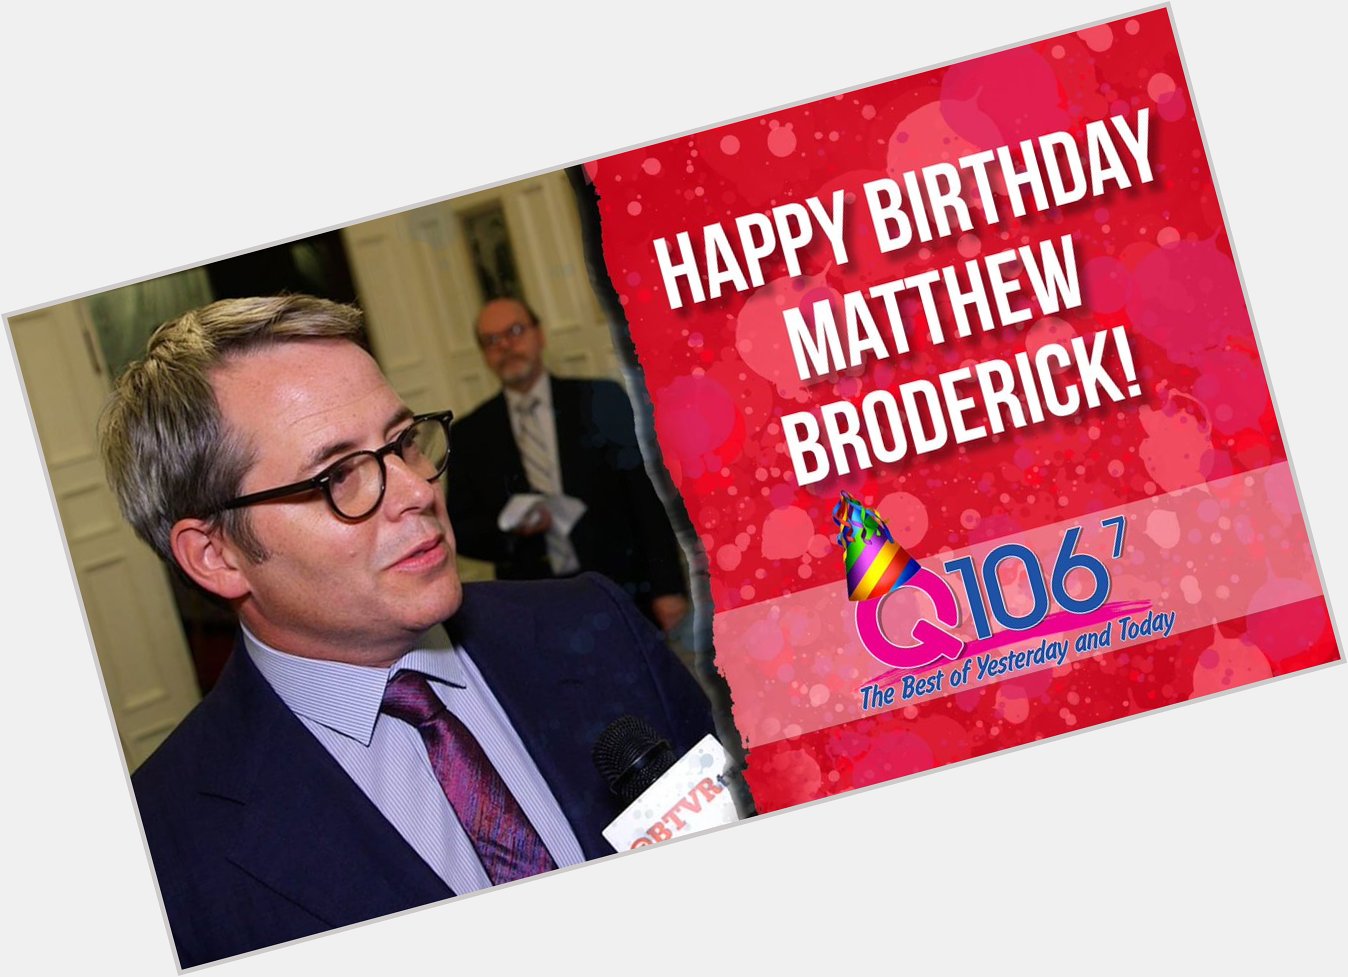 Ferris Bueller is growing up right before our eyes. Happy 56th Birthday to Matthew Broderick! 